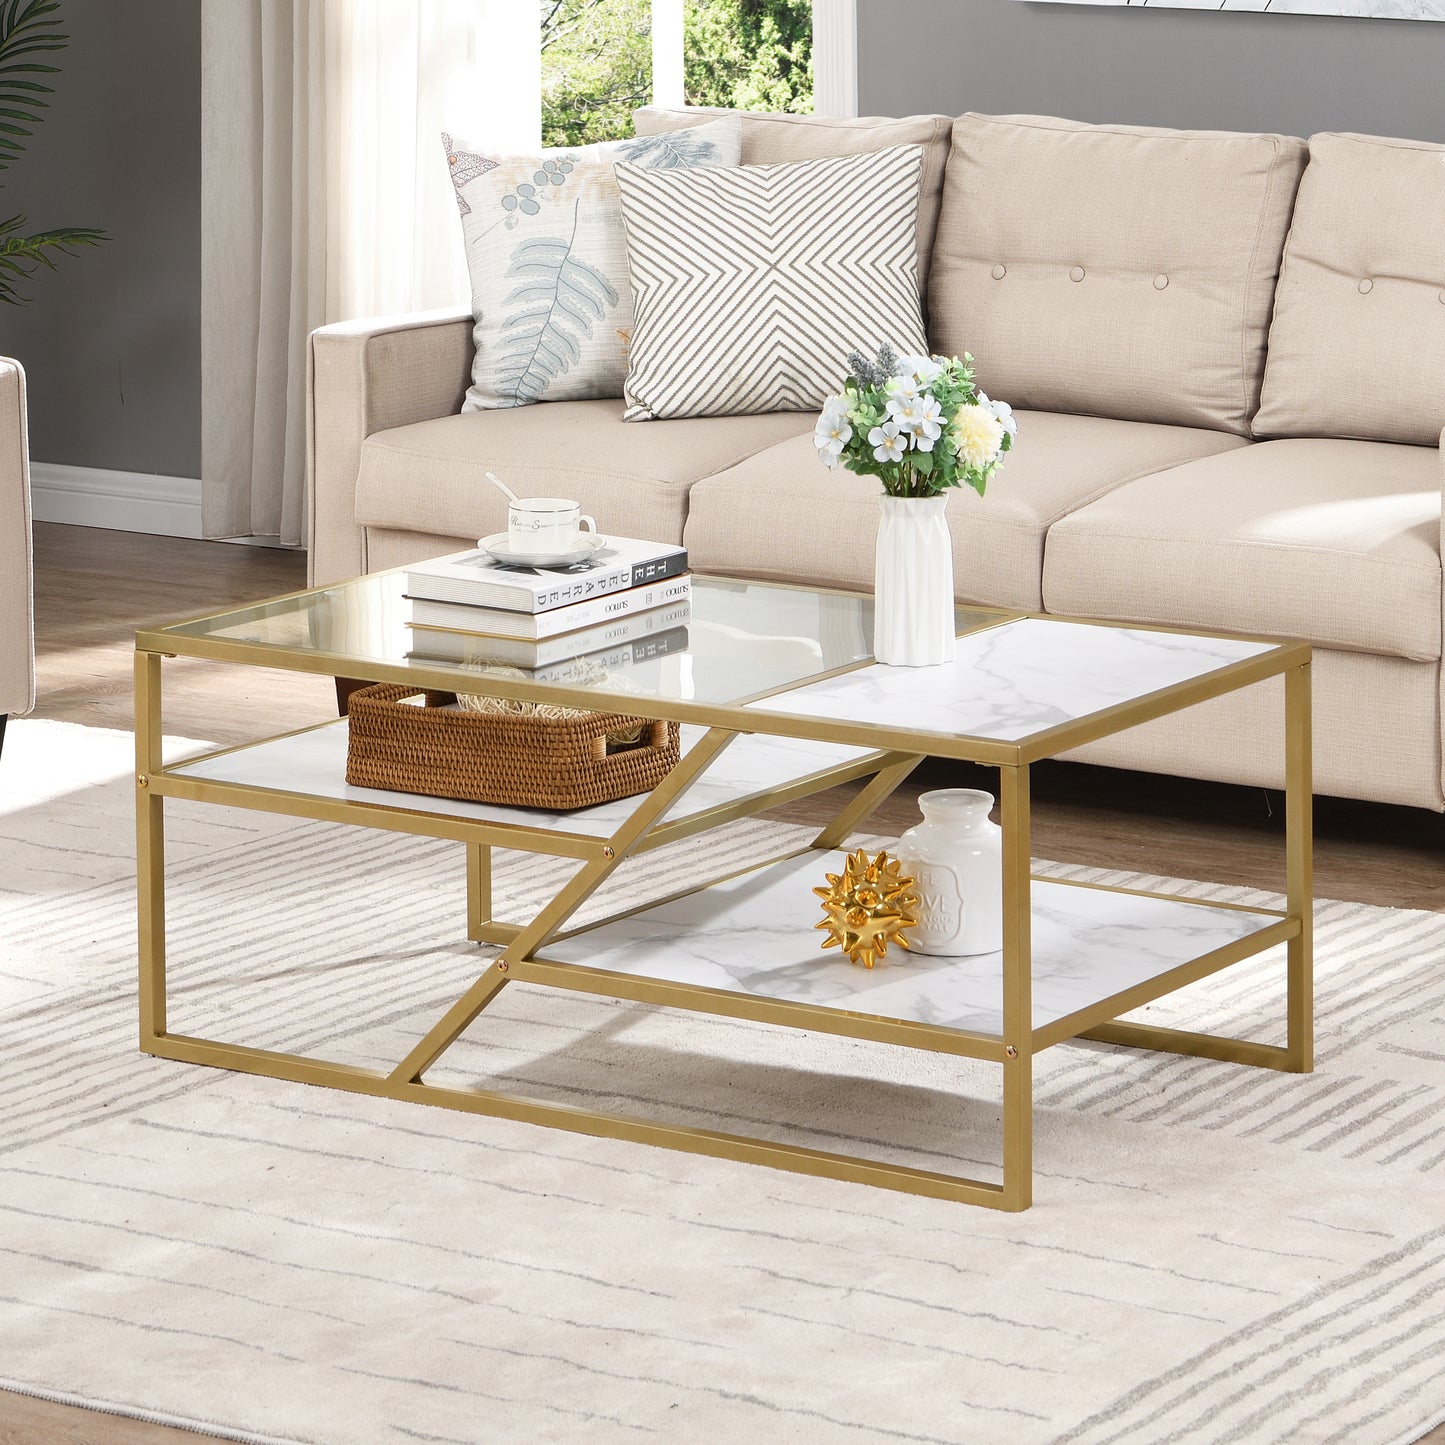 Golden Coffee Table with Storage Shelf